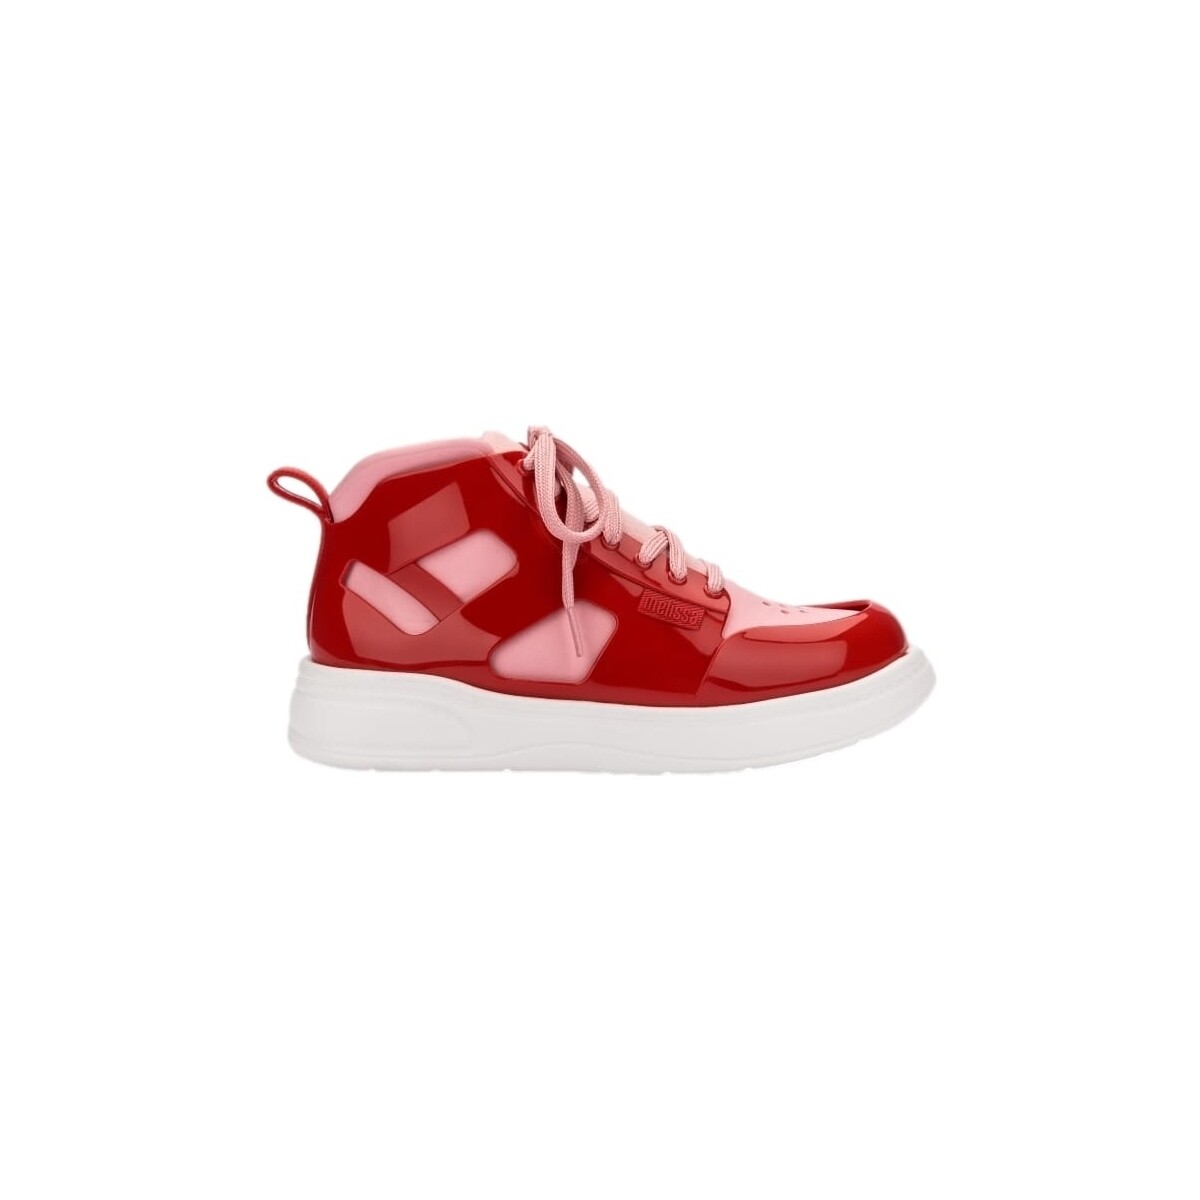 Chaussures Femme Pull&Bear Sports Michelle Sneakers rétro bianche Player Michelle Sneaker AD - White/Red Rouge